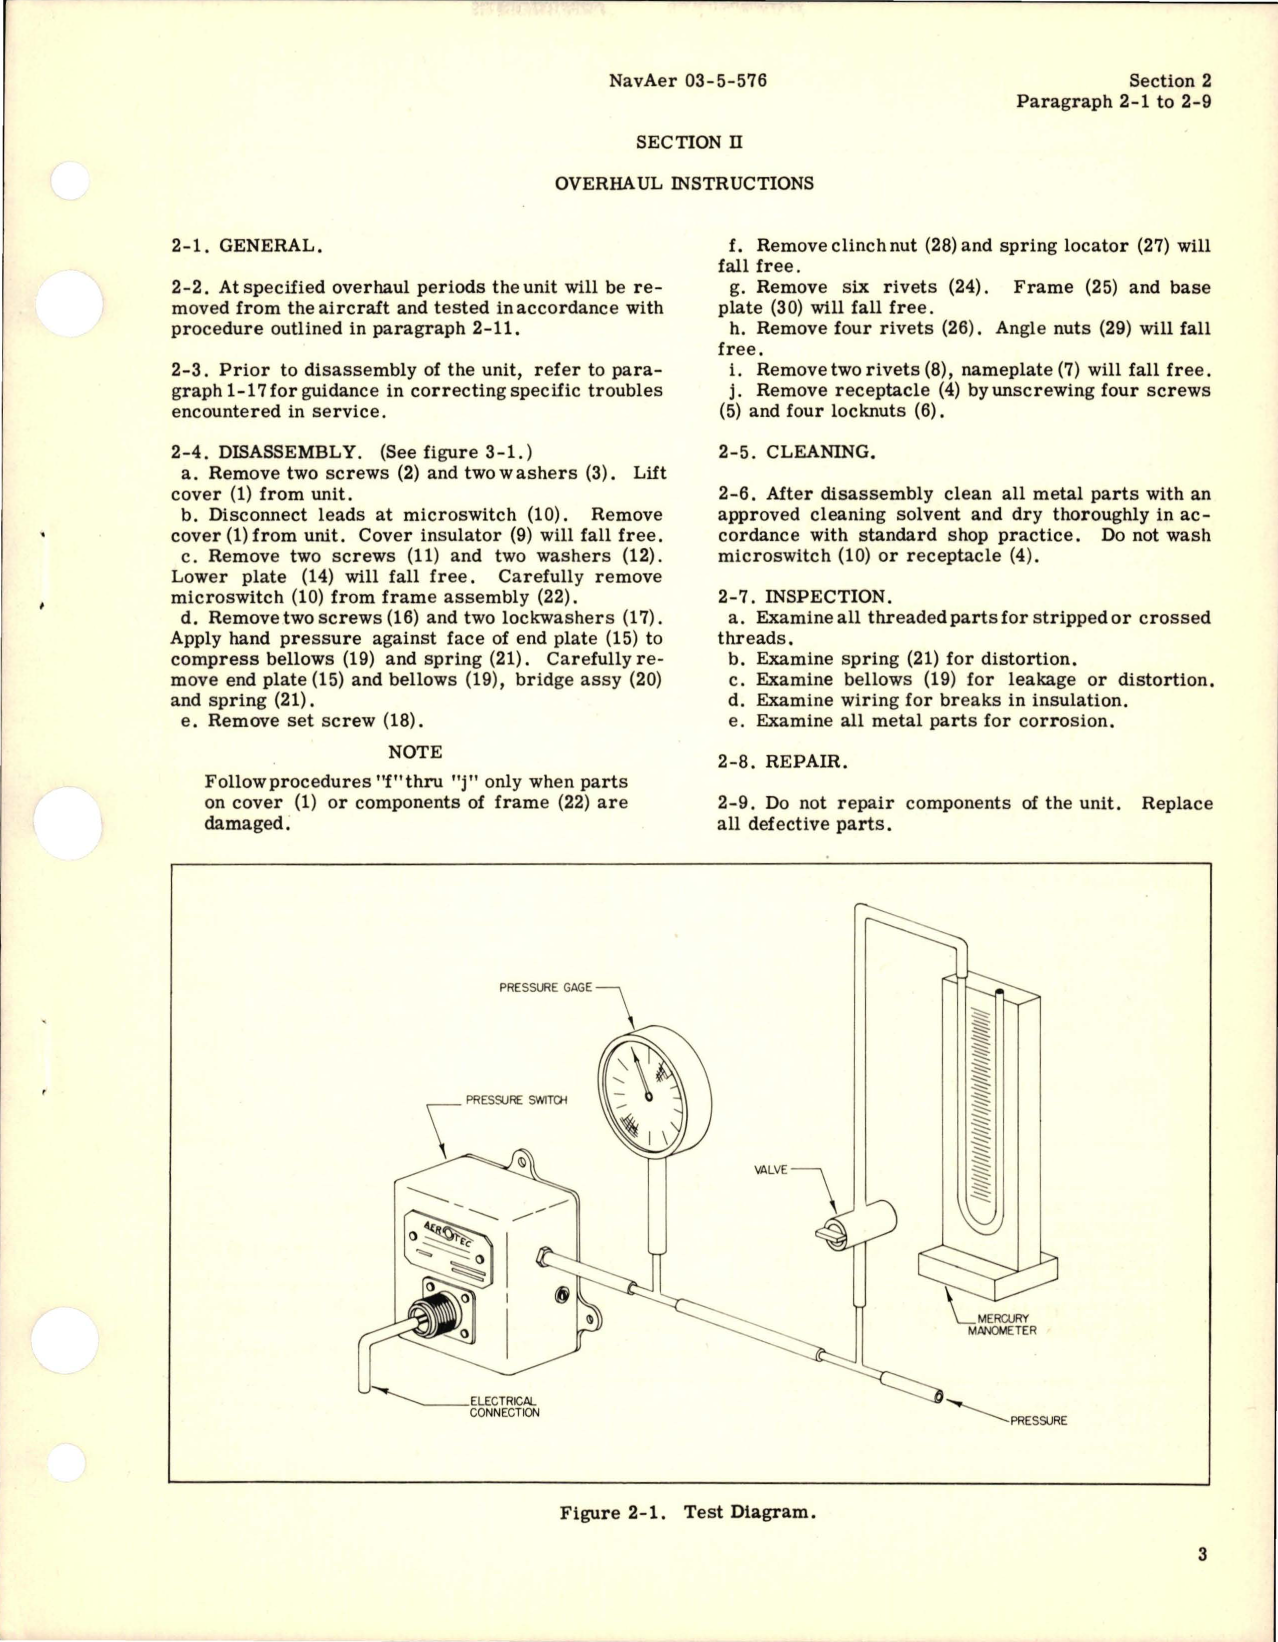 Sample page 5 from AirCorps Library document: Operation, Service and Overhaul Instructions with Parts Catalog for Pressure Switch - Part A-301 